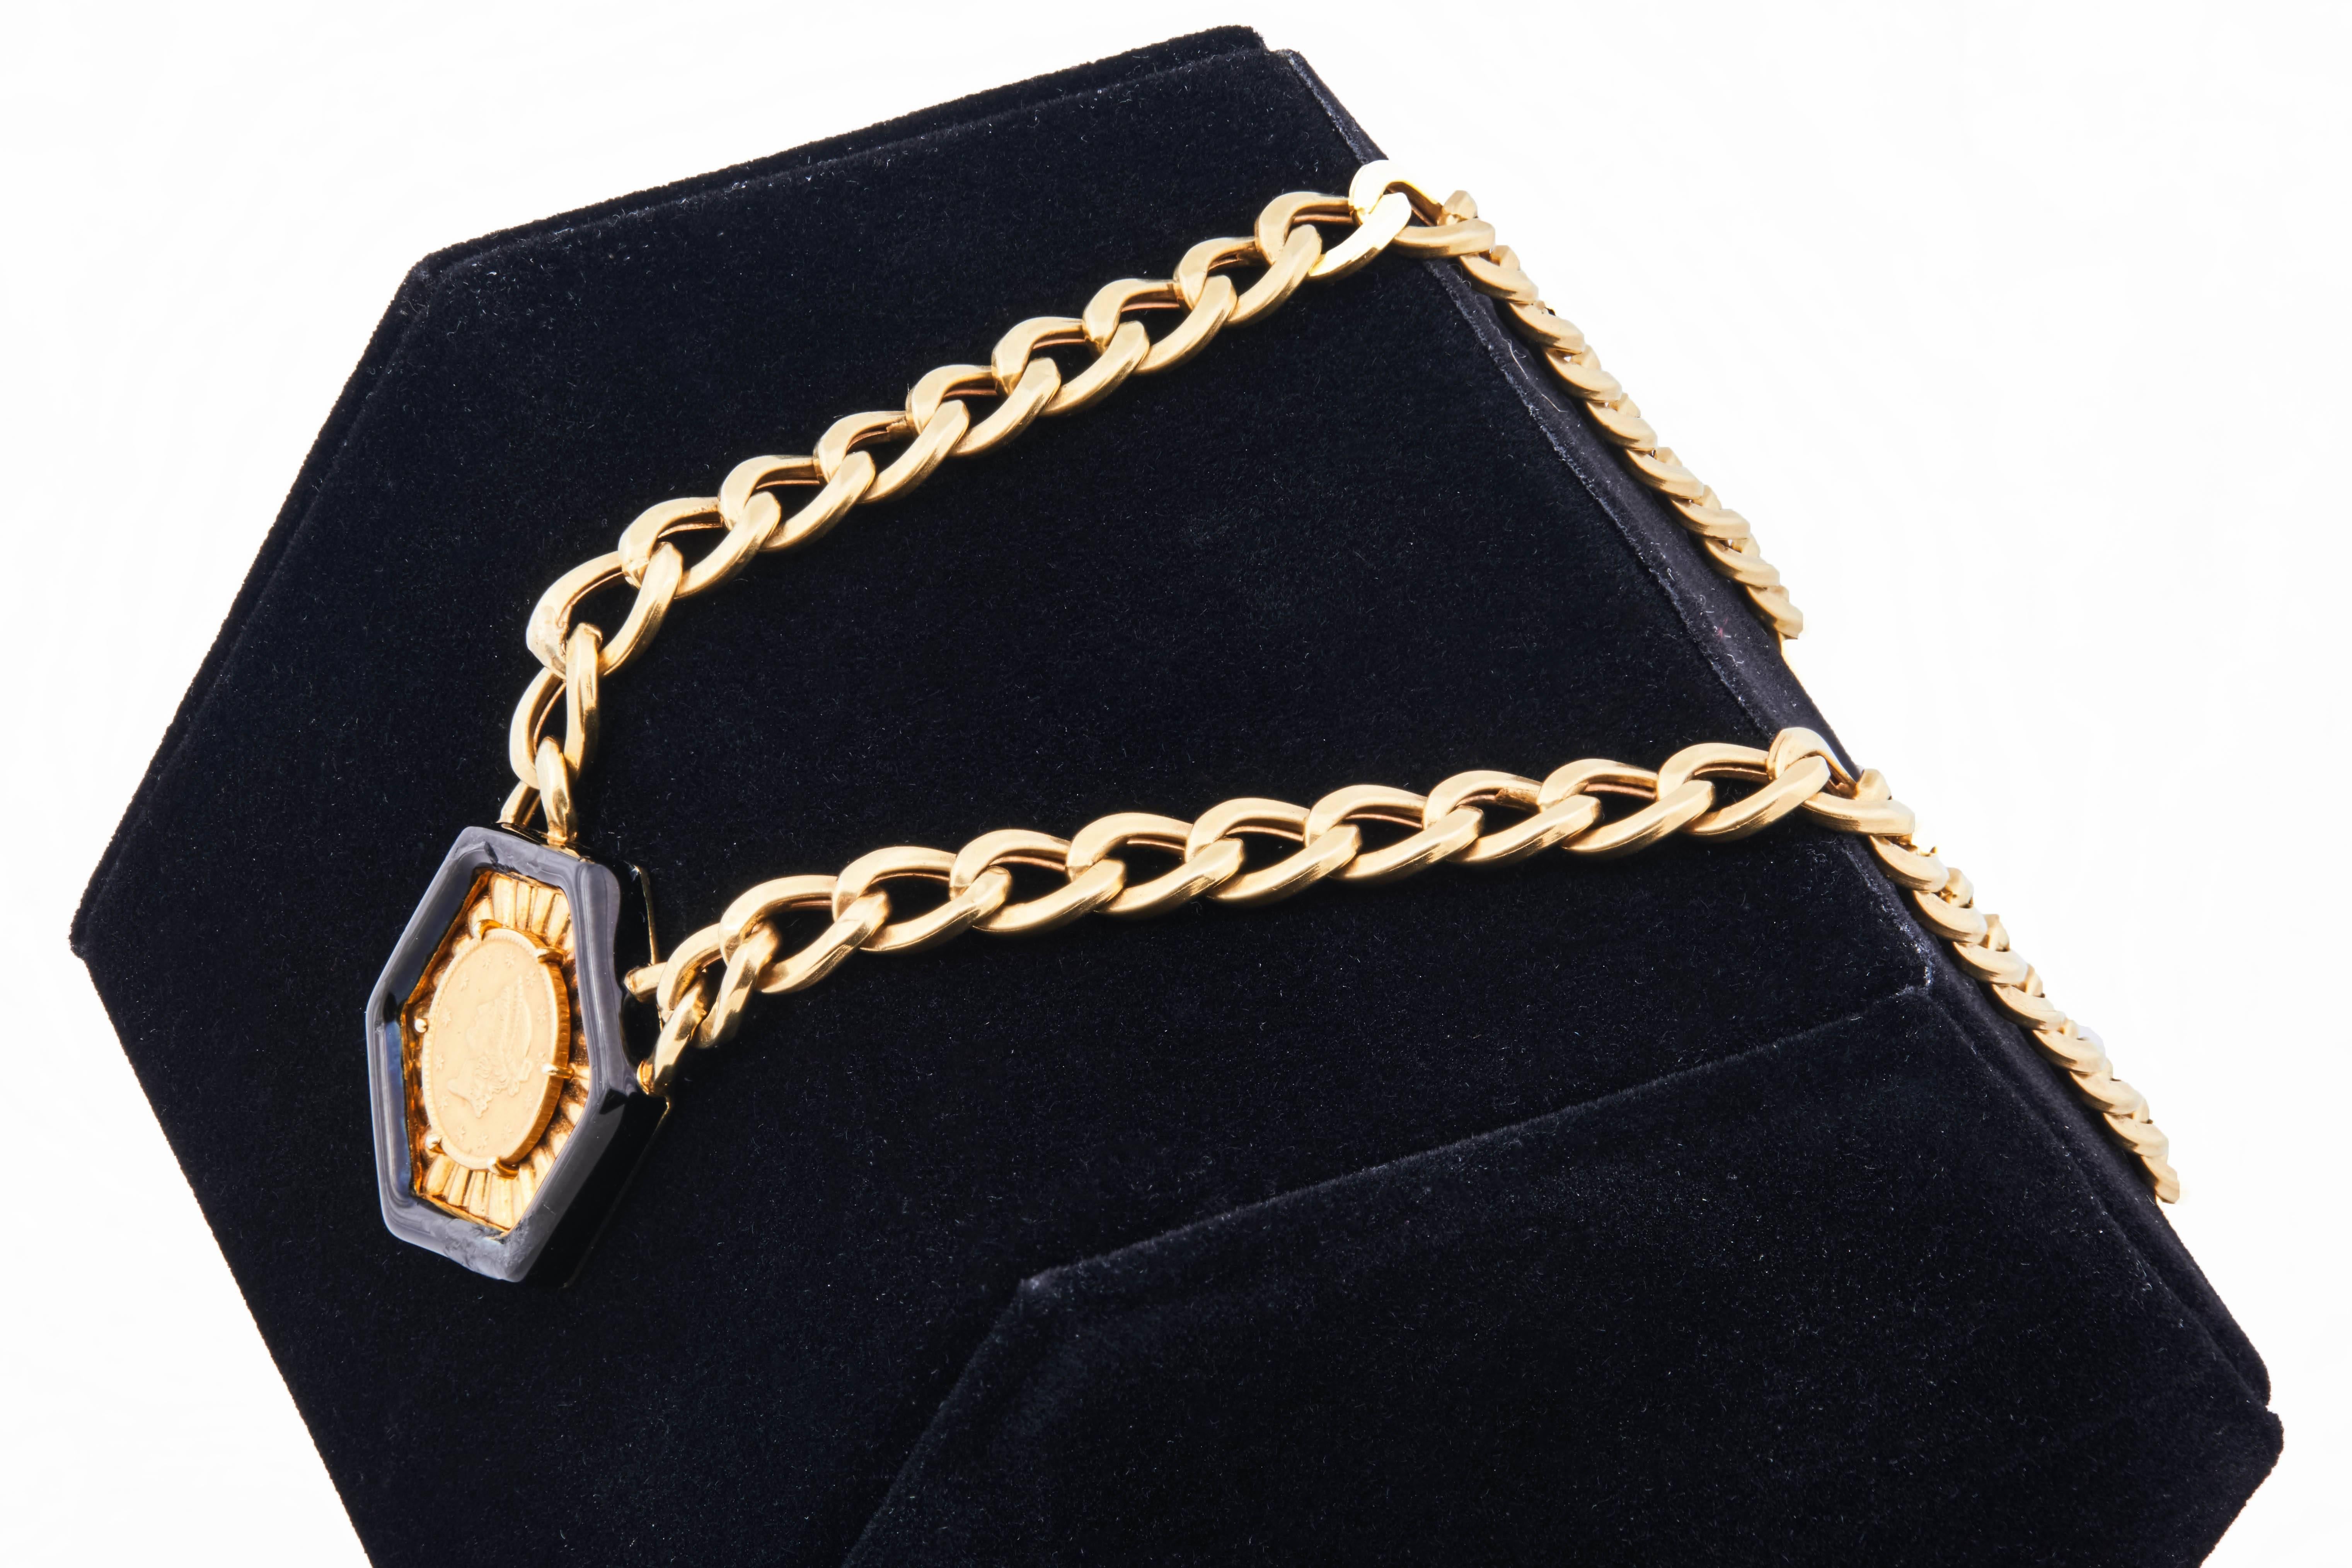 Vintage 1970s David Webb 1851 Liberty Head Dollar on a gold chain necklace. The coin is set in a black enamel hexagonal pendant. The pendant and chain are both 18K yellow gold while the coin gold content is 90% (roughly 22k). Chain length is